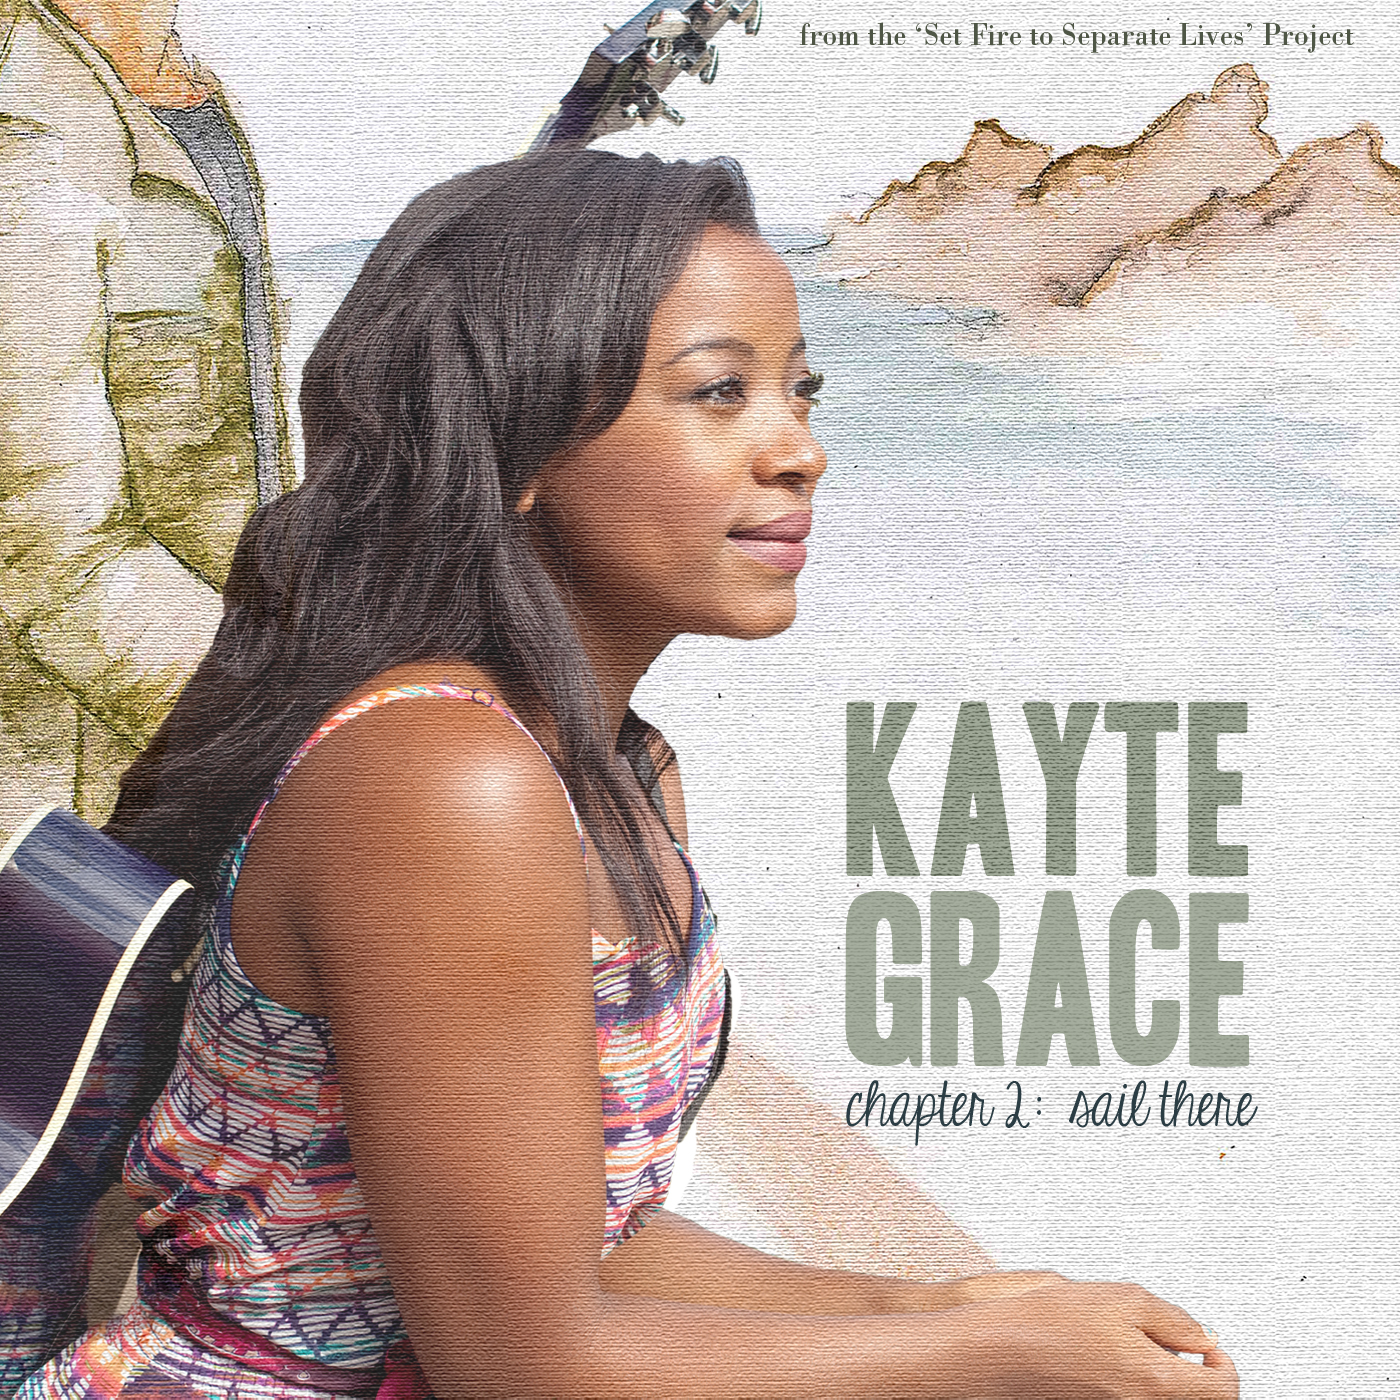 Kayte Grace - Chapter 2: Sail There EP - album art